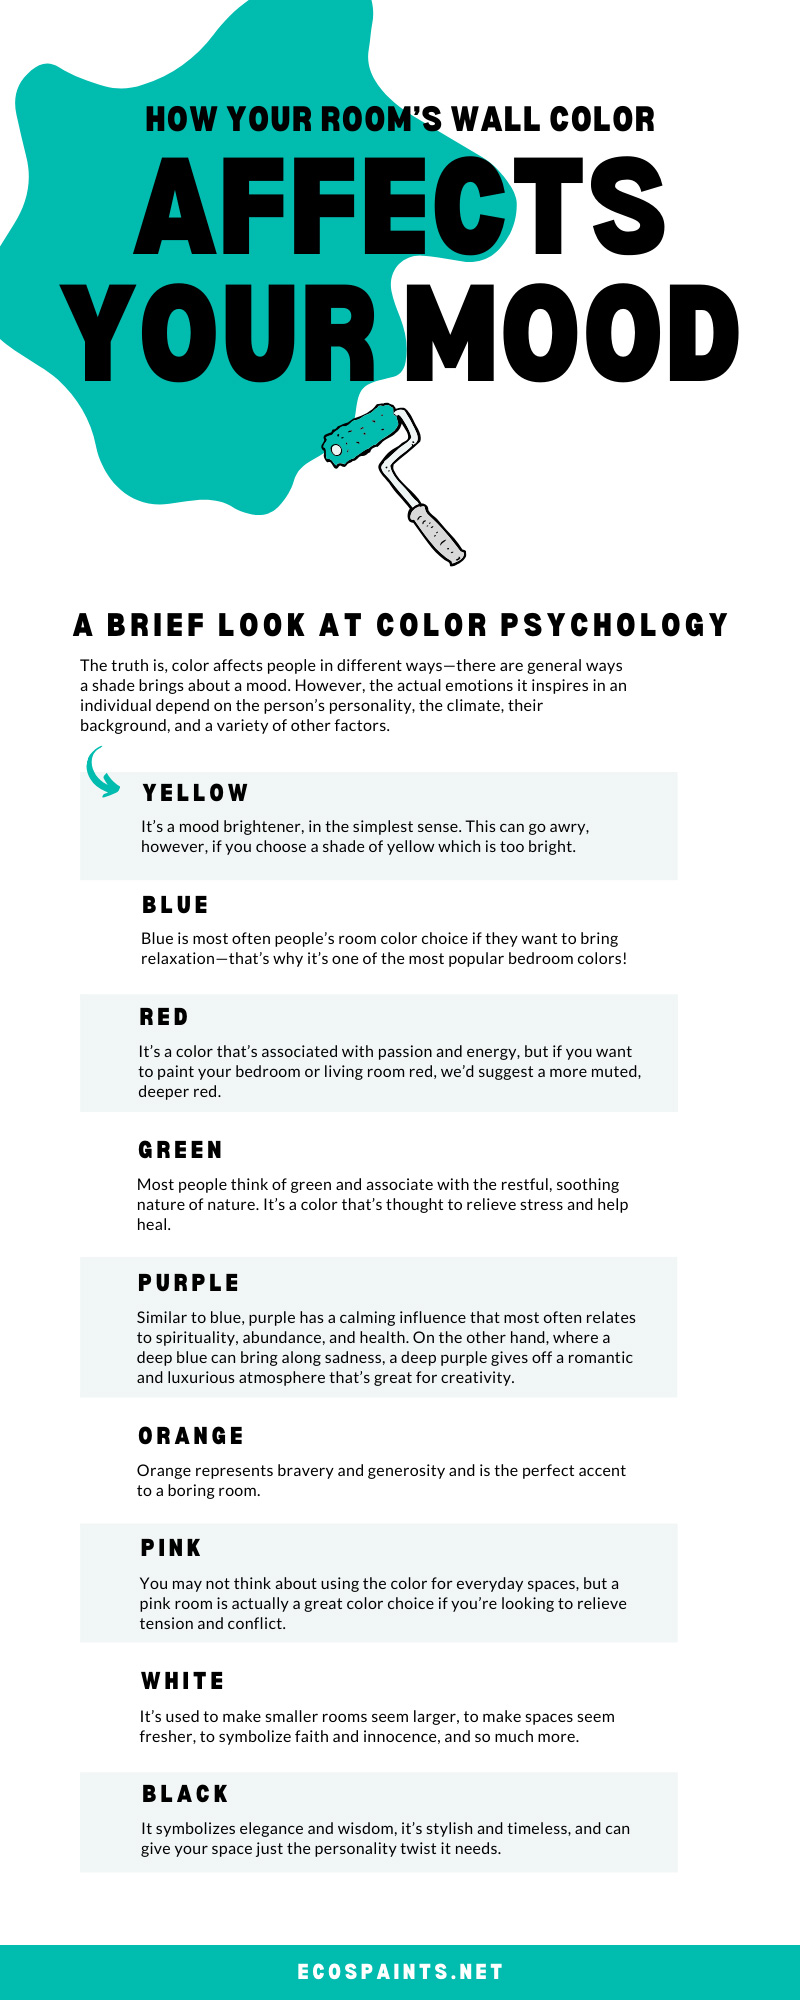 How Your Room’s Wall Color Affects Your Mood
